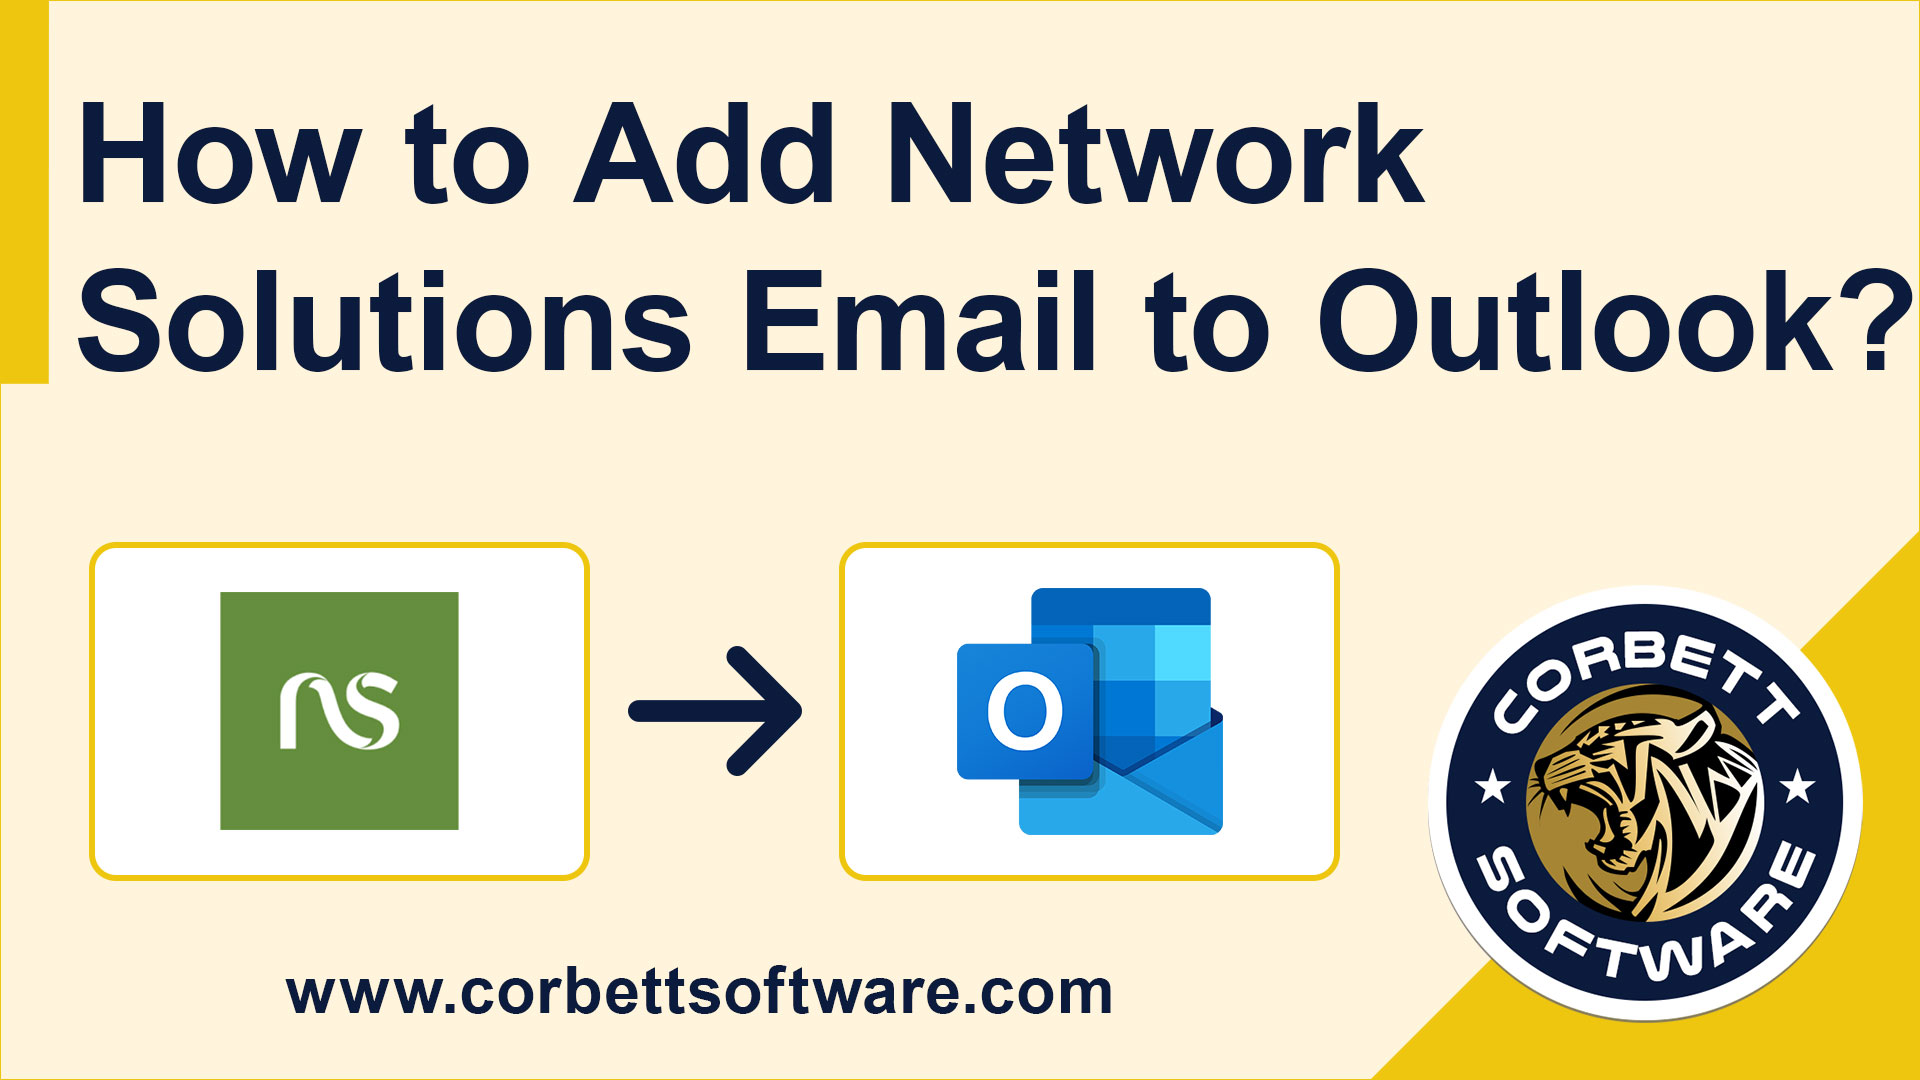 network solution email to outlook